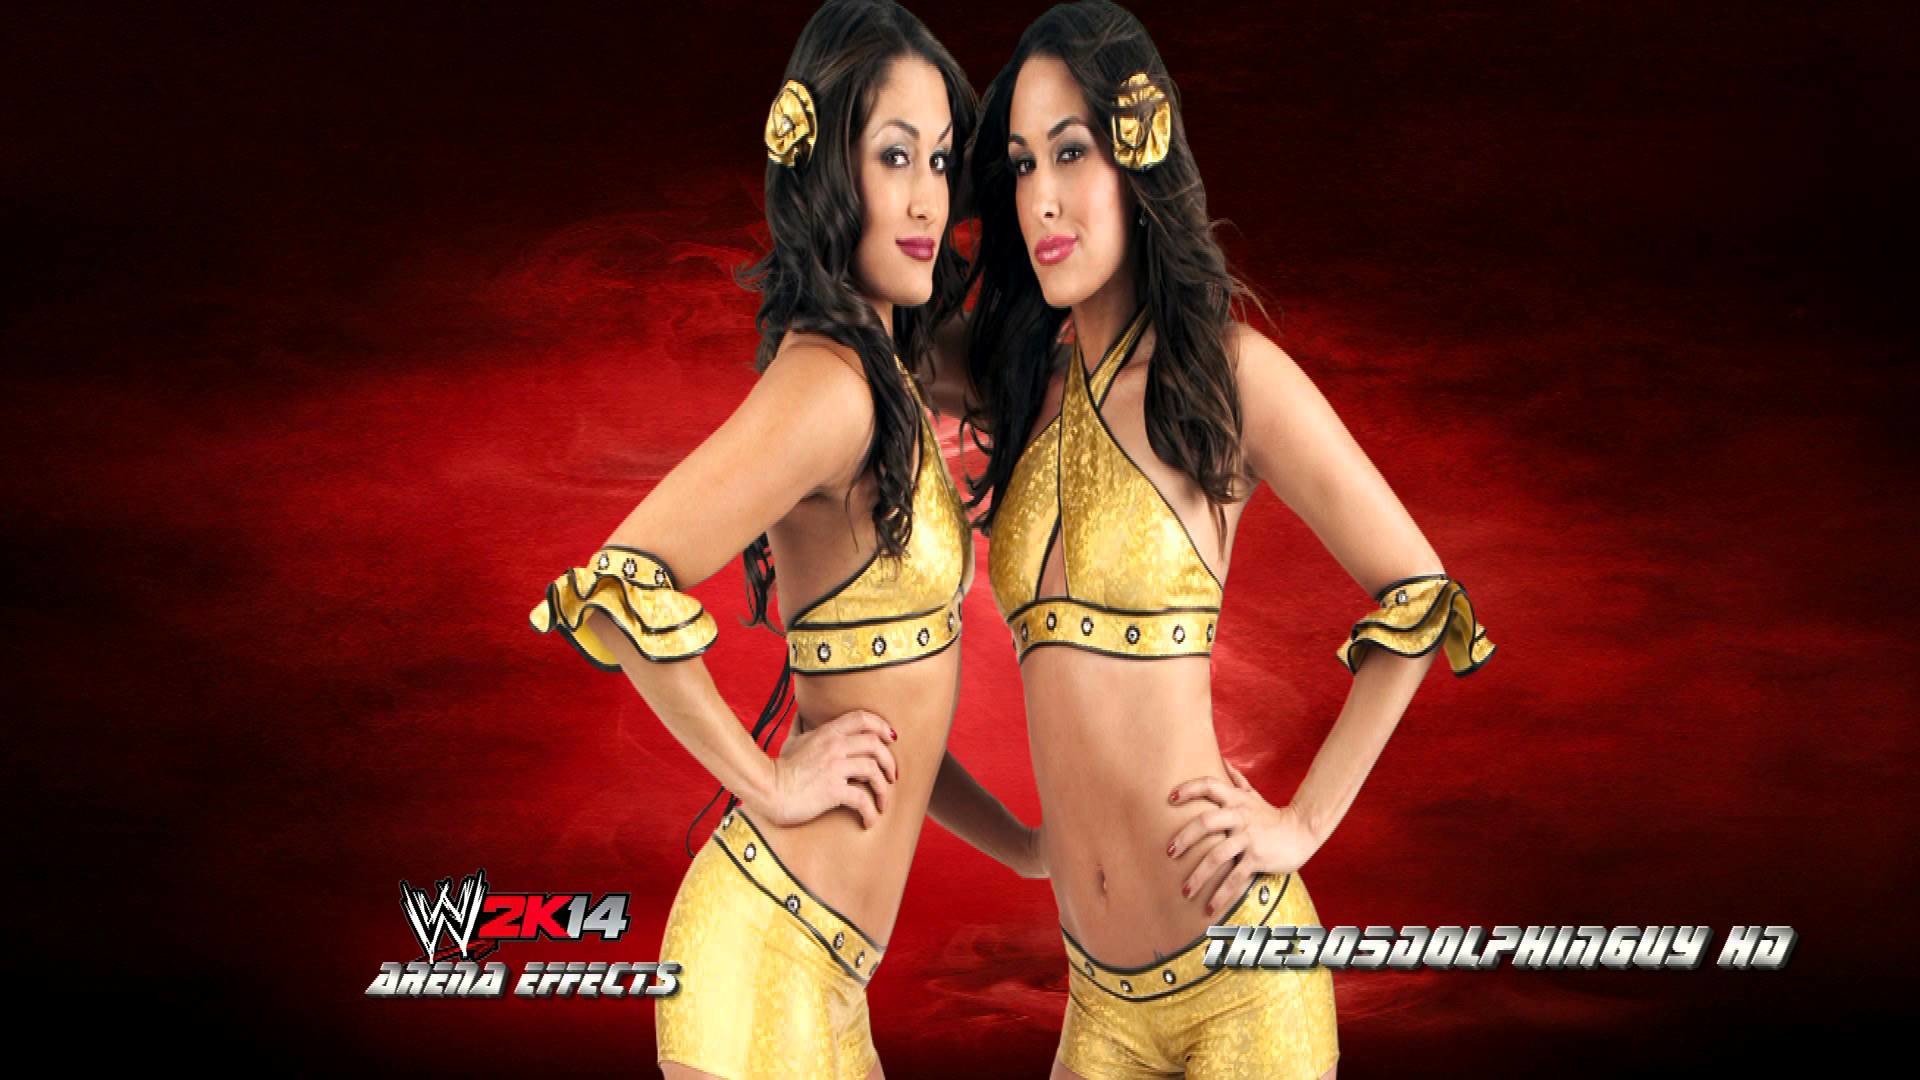 1920x1080 #WWE: The Bella Twins 2nd Theme - You Can Look (But You Can't Touch) [HQ +  Arena Effects] - YouTube